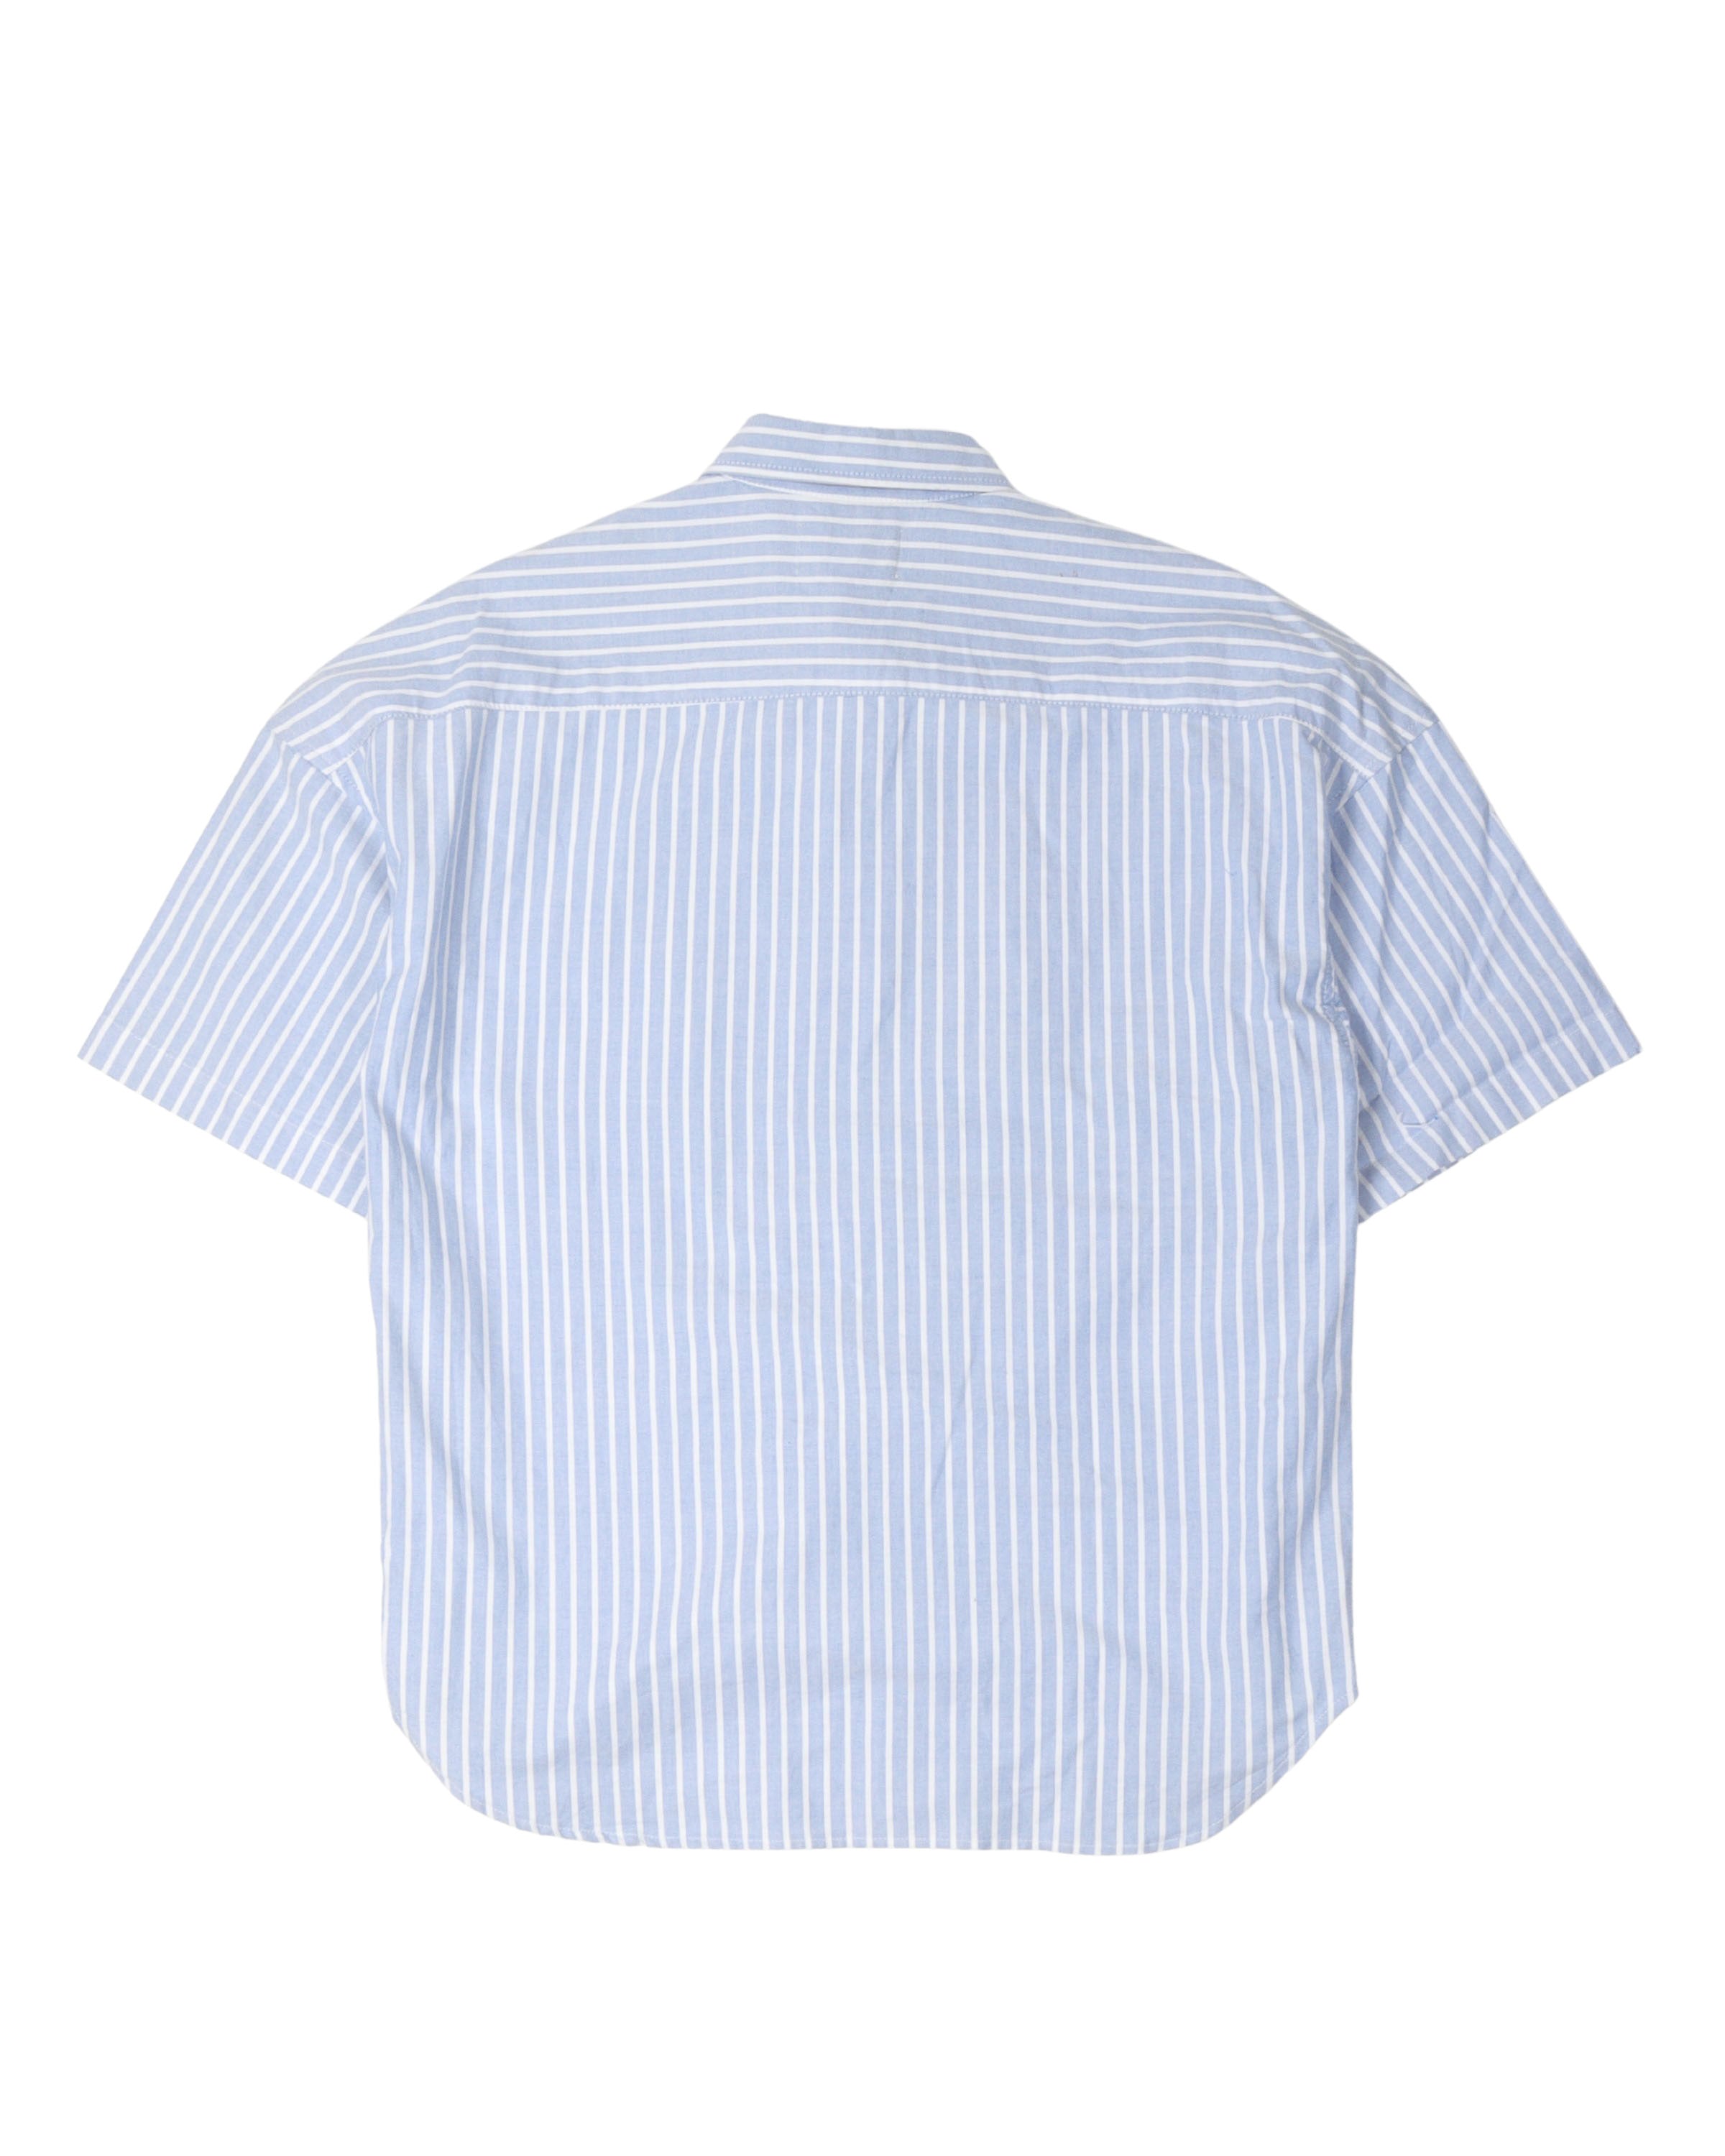 Fourth Collection Zipper Detail Striped Short Sleeve Shirt